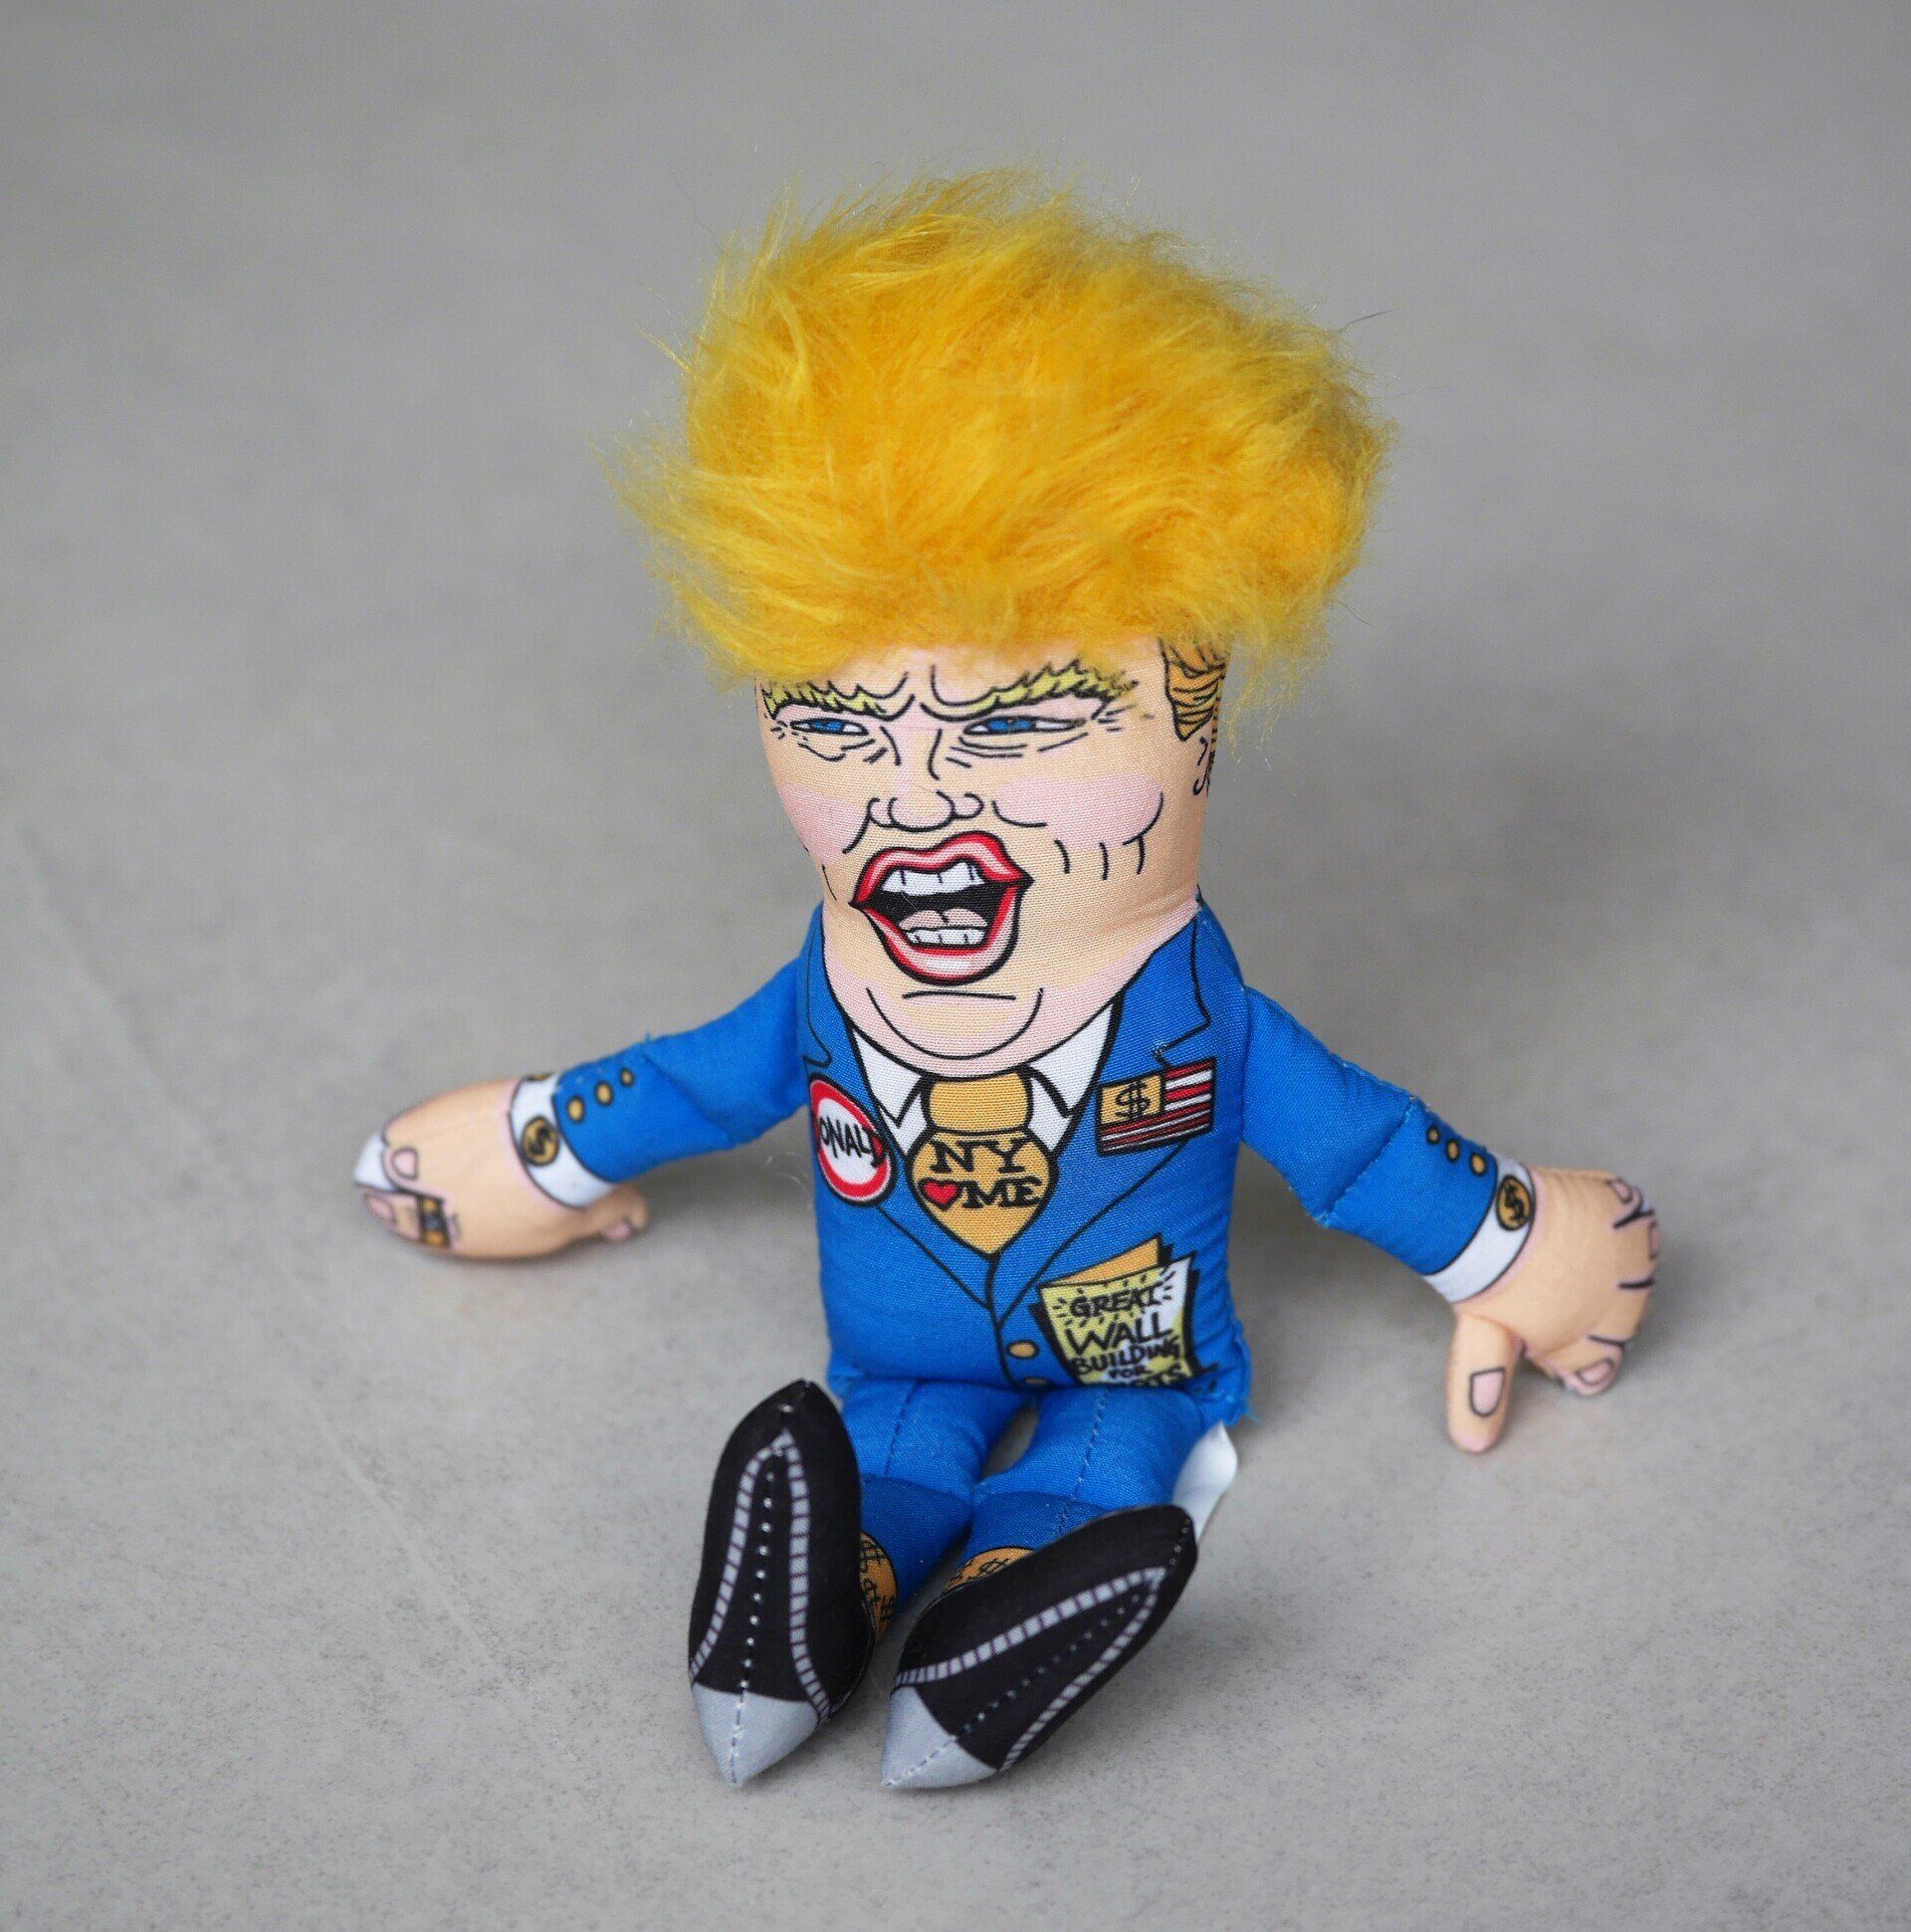 a doll of Donald Trump